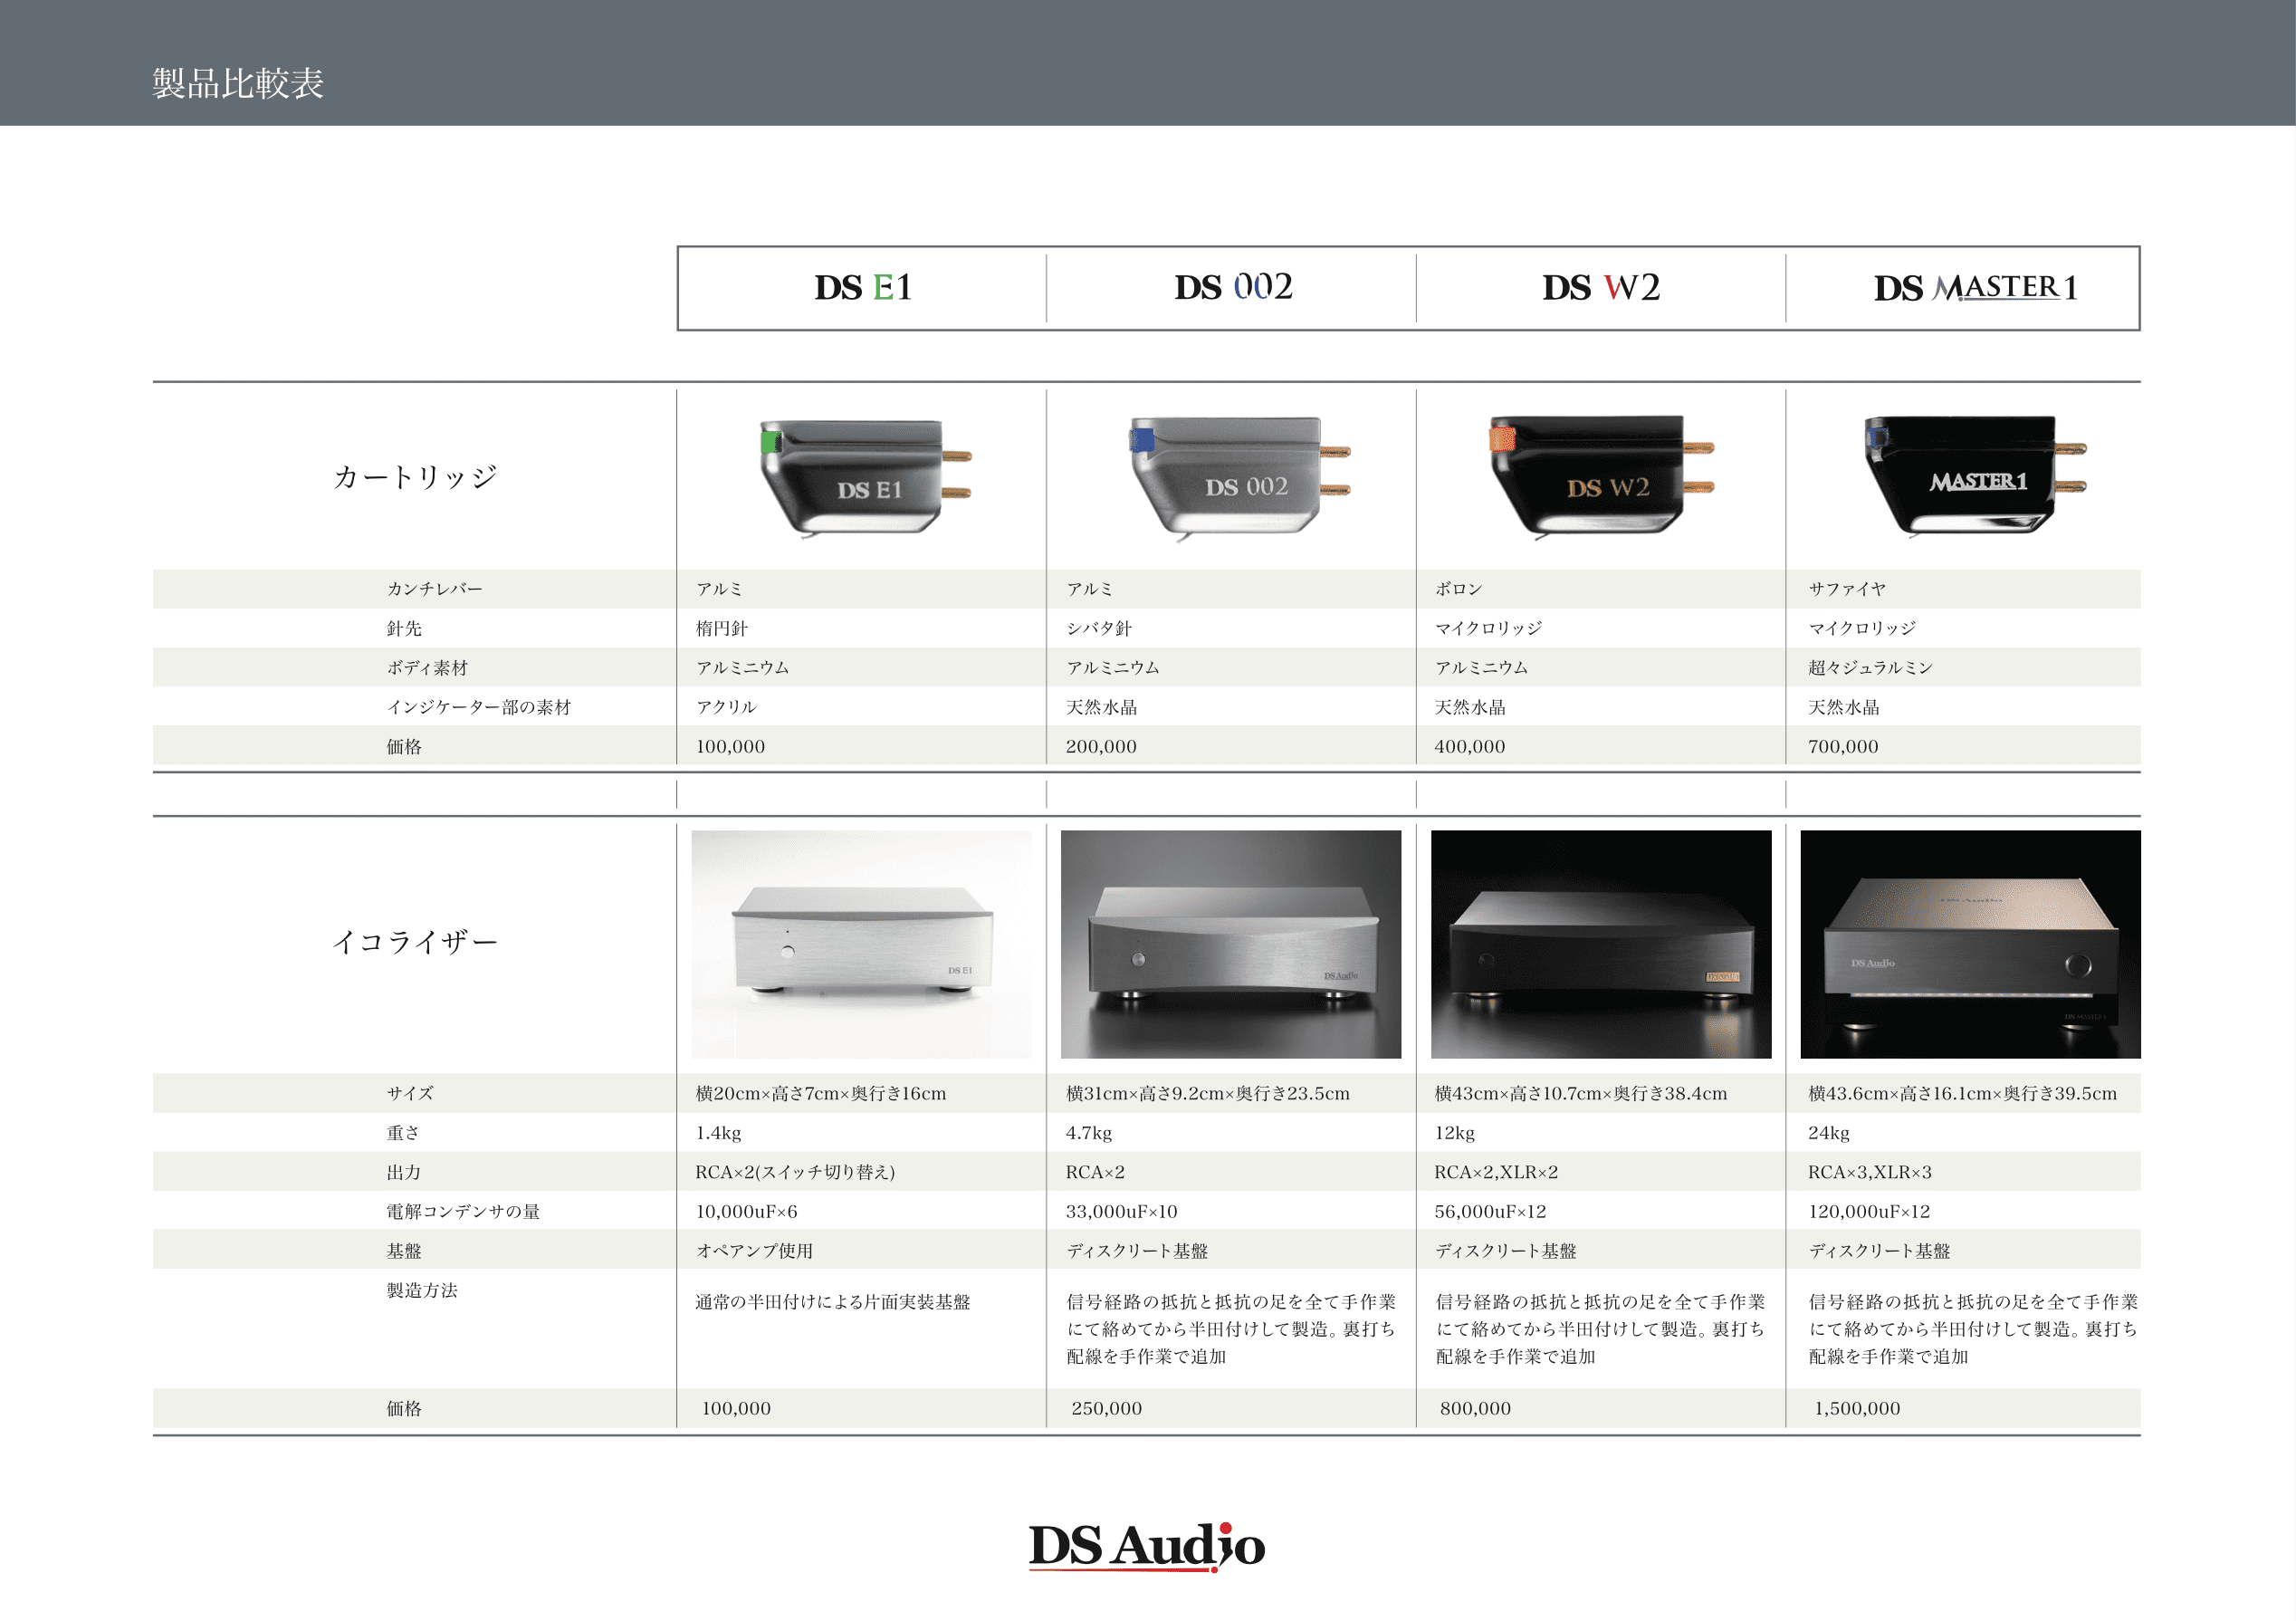 Product specifications comparison sheet